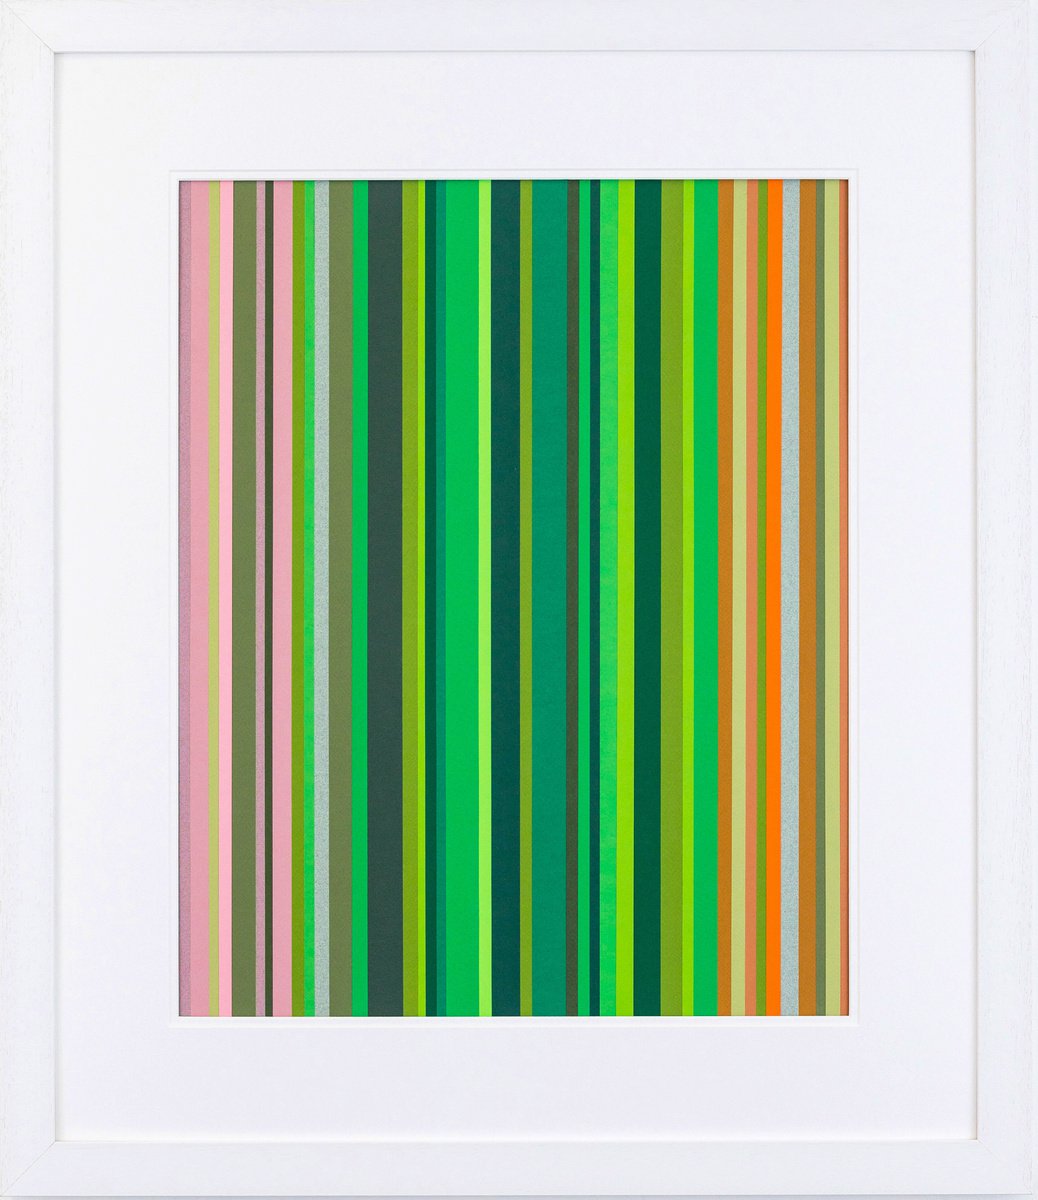 Wednesday - Day Colour Series - Green by Brian Reinker